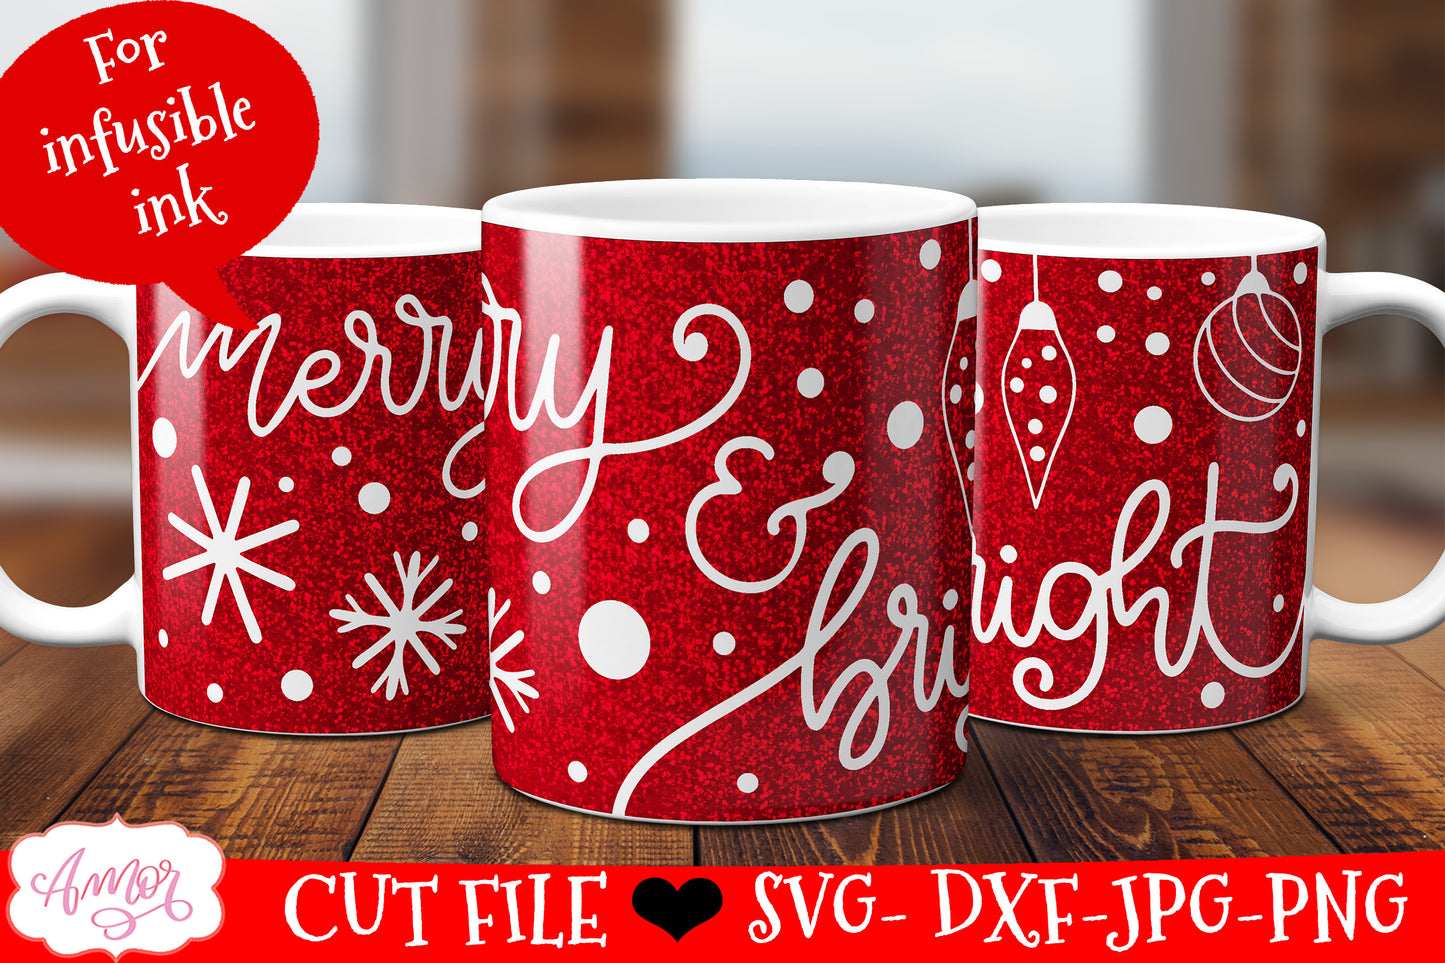 Merry and Bright Mug Wrap SVG for Cricut infusible ink 12oz